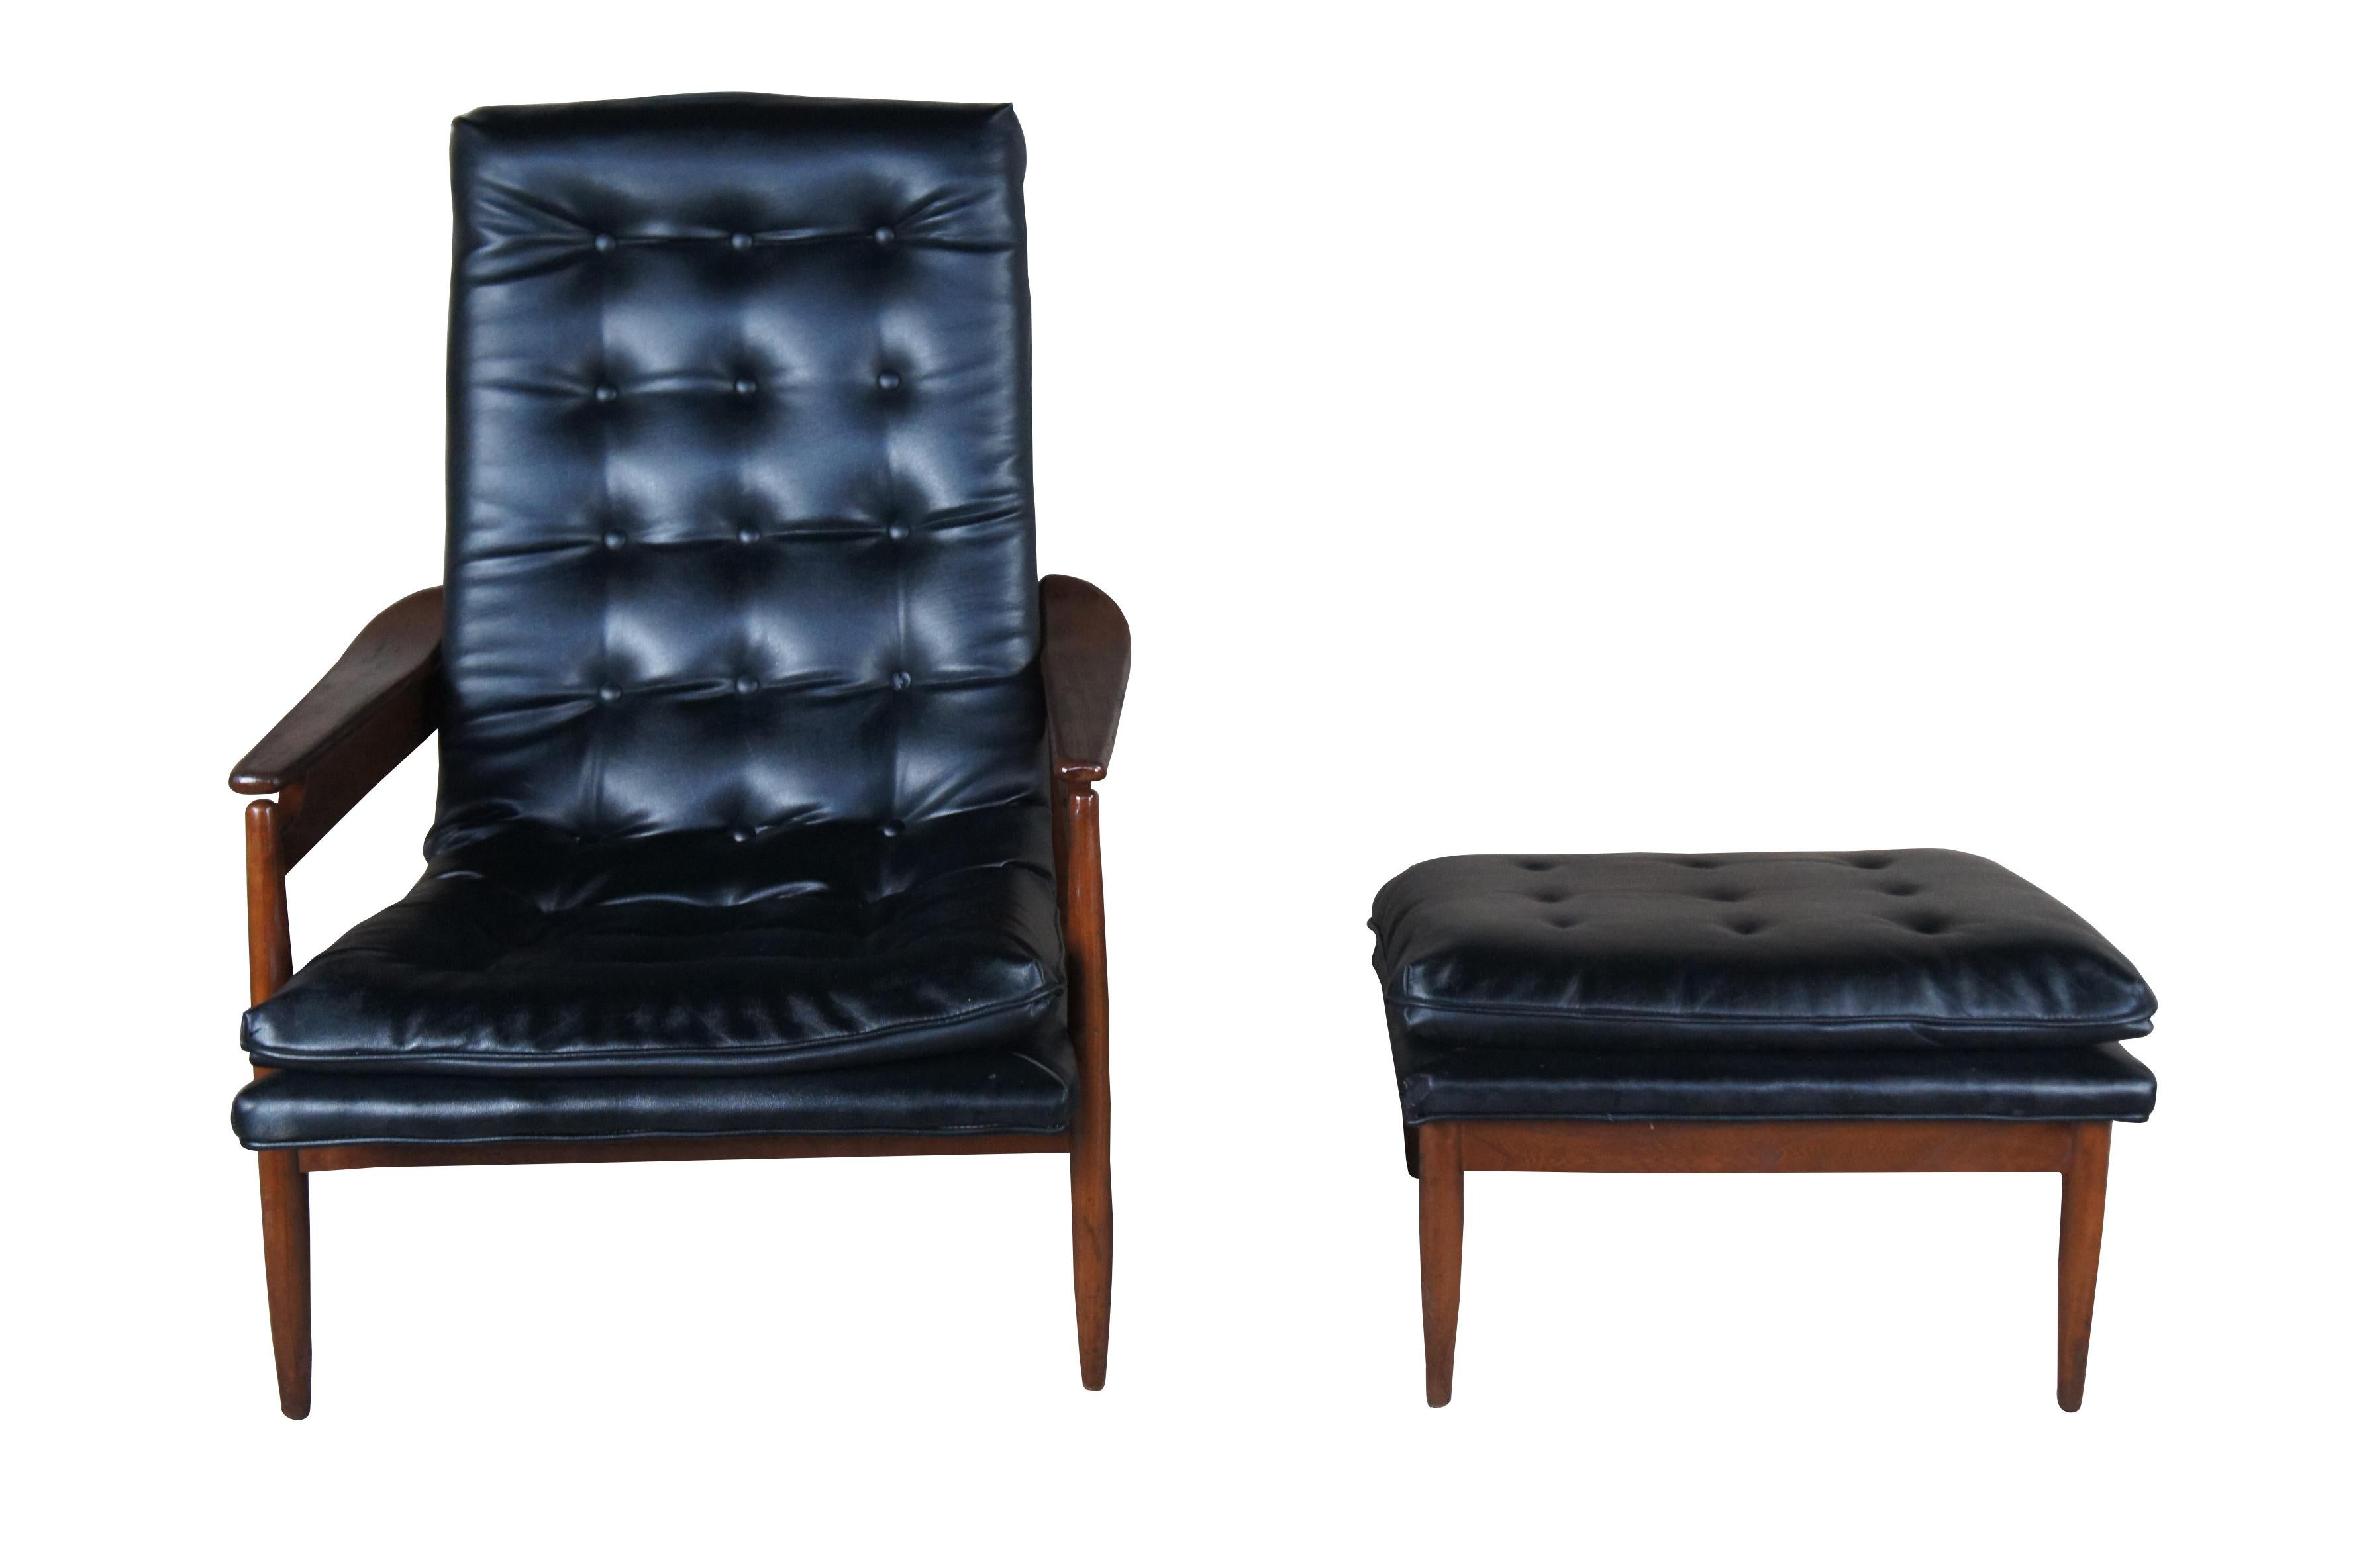 Midcentury Milo Baughman scoop lounge armchair and ottman. Made of oak featuring a walnut finish and black tufted Naugahyde upholstery.
Milo Baughman (American, 1923–2003) was a furniture designer who was born in Goodland, KS, on October 7, 1923.